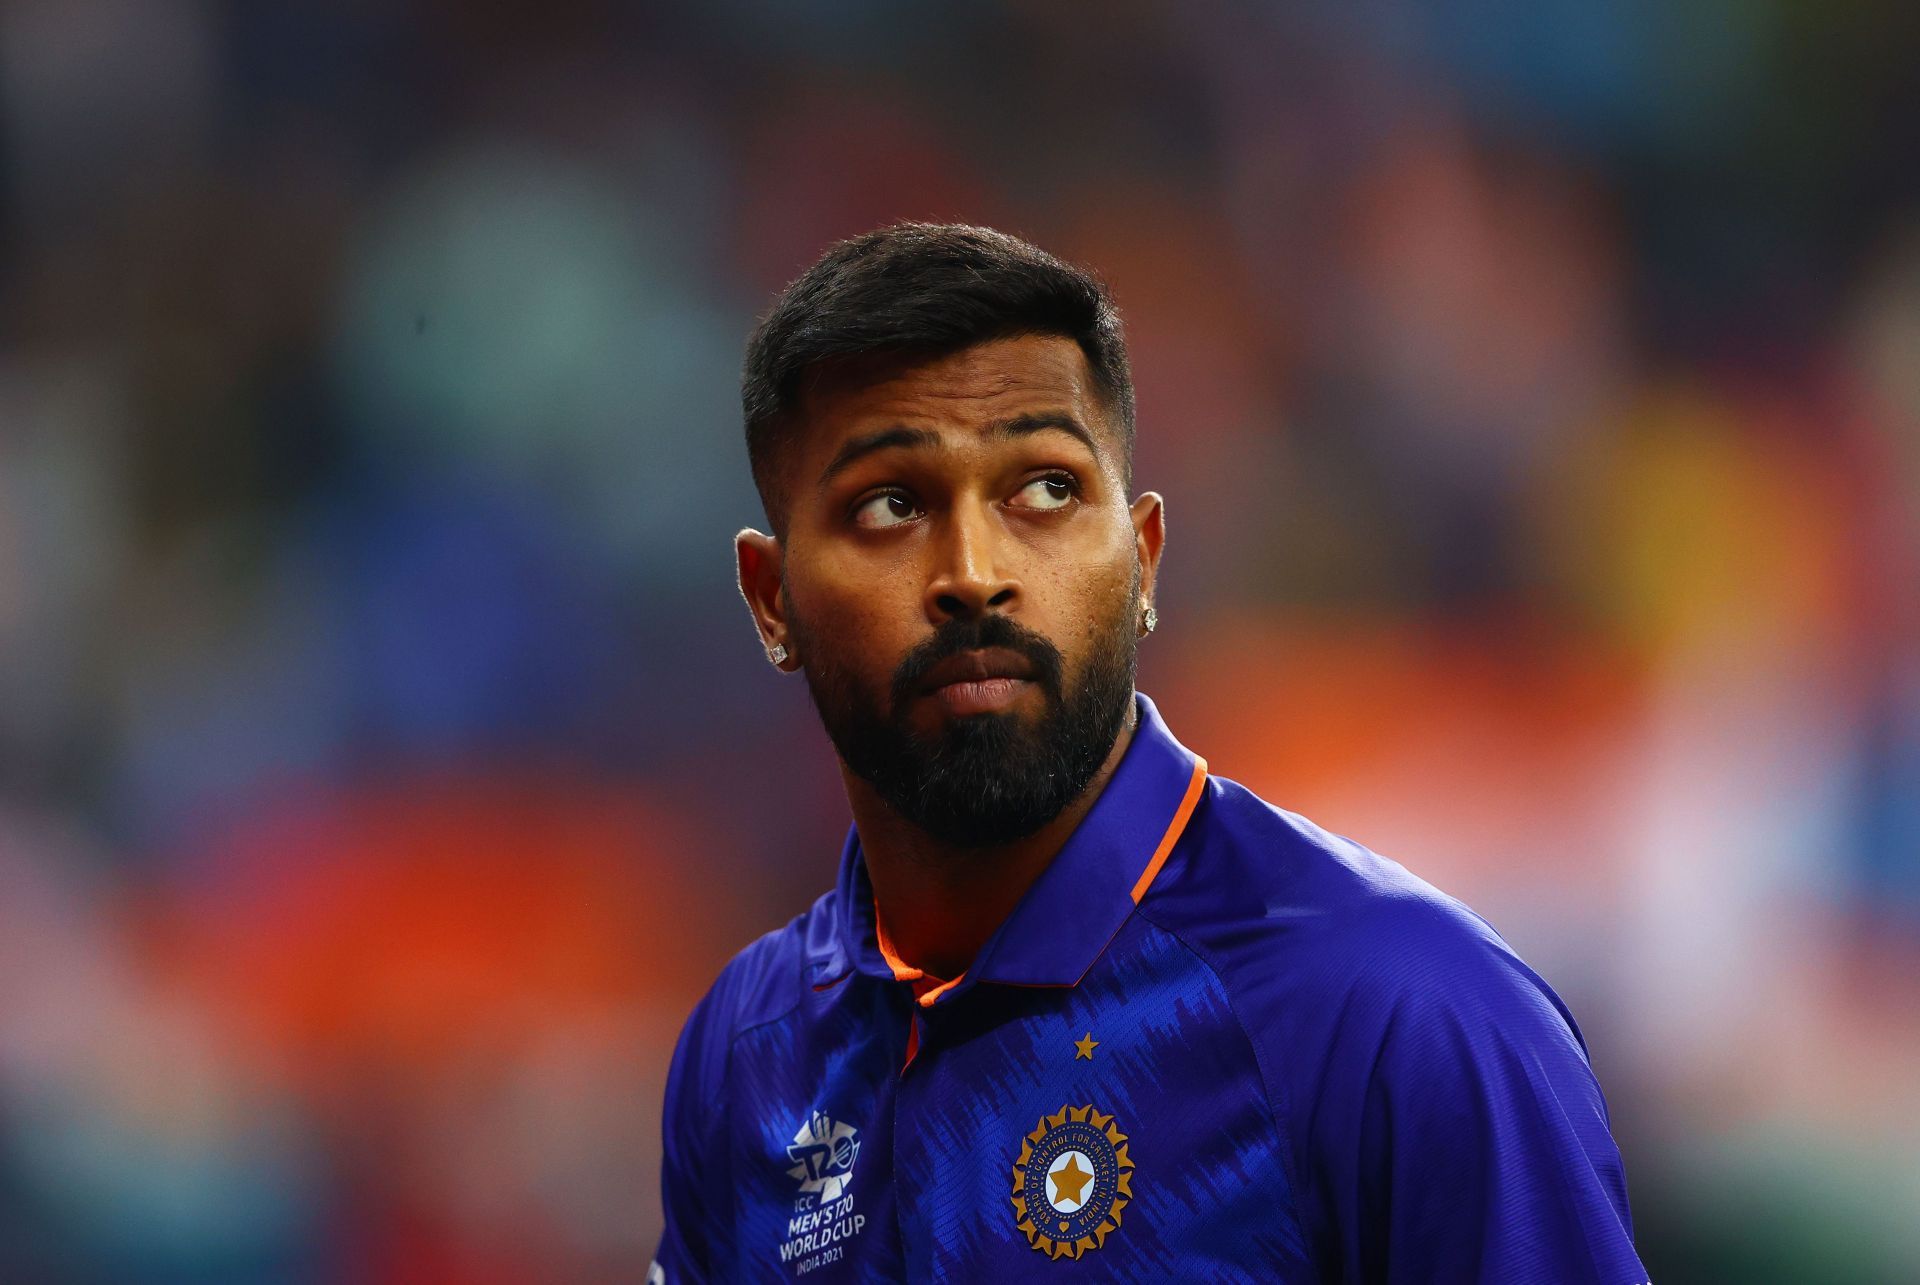 Hardik Pandya had a mixed outing in the ICC T20 World Cup 2021 (Credit: Getty Images)